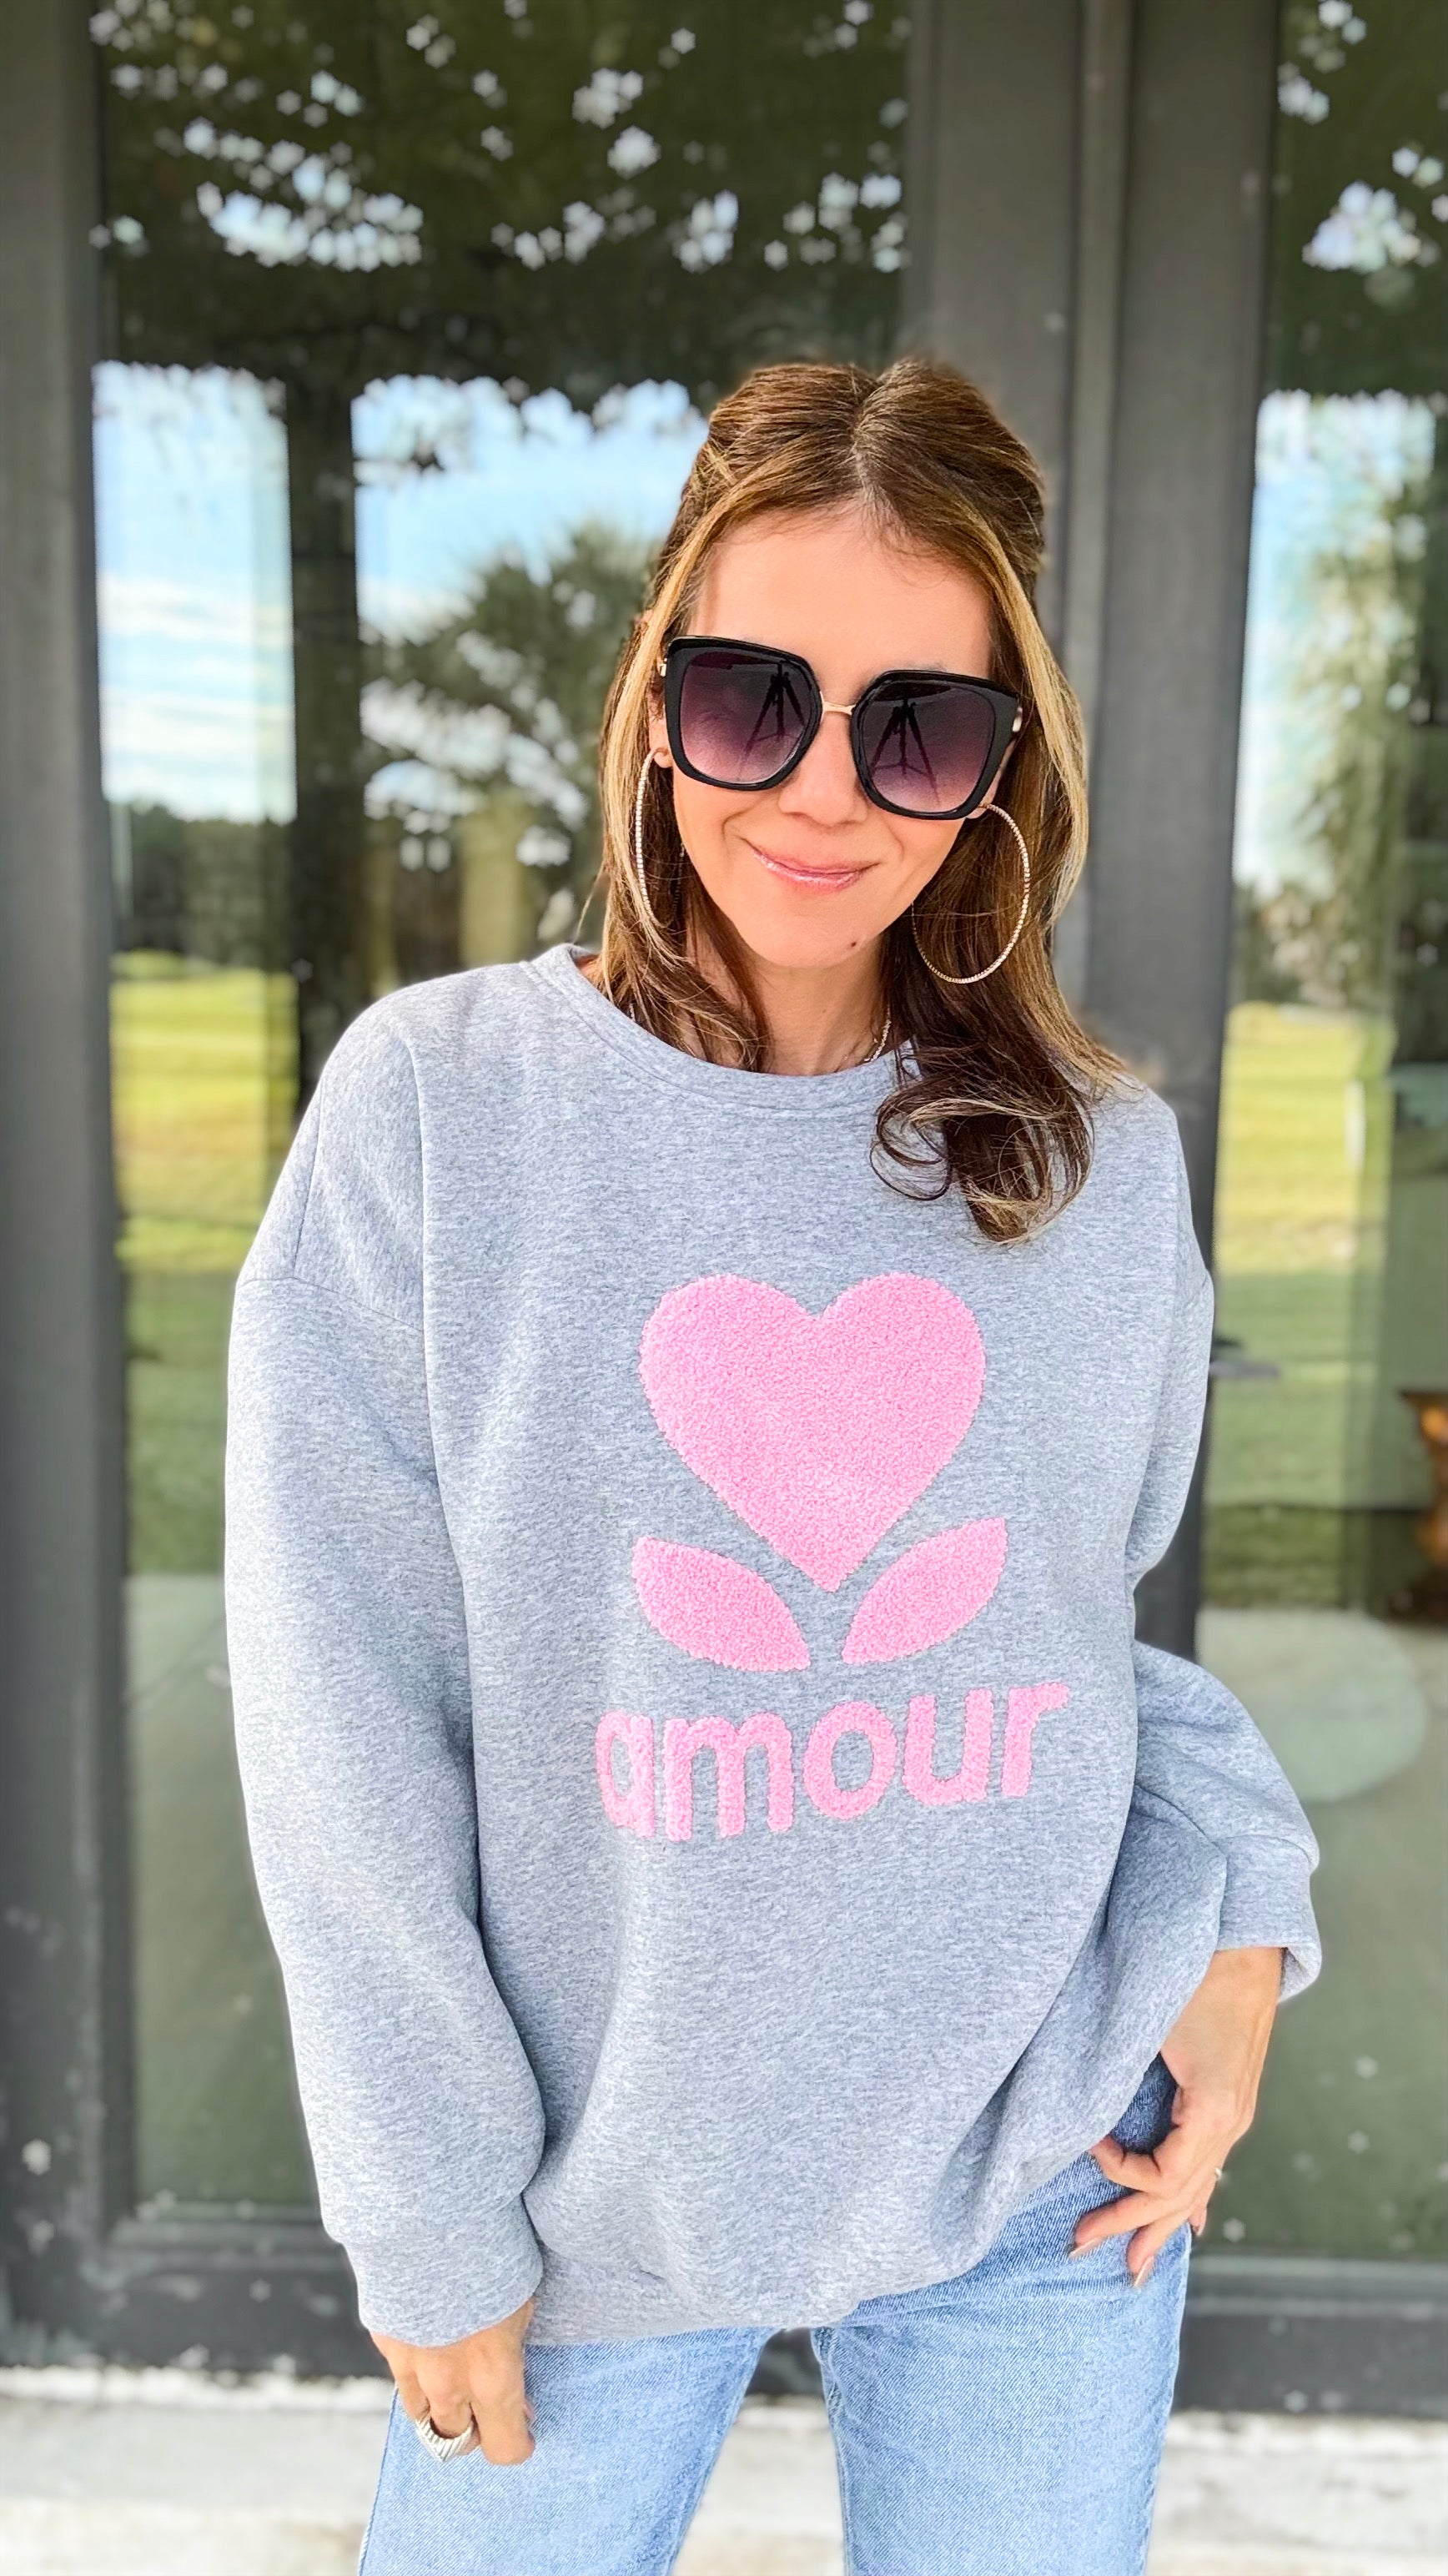 Amour Italian Sweatshirt - Grey/Pink-140 Sweaters-Germany-Coastal Bloom Boutique, find the trendiest versions of the popular styles and looks Located in Indialantic, FL